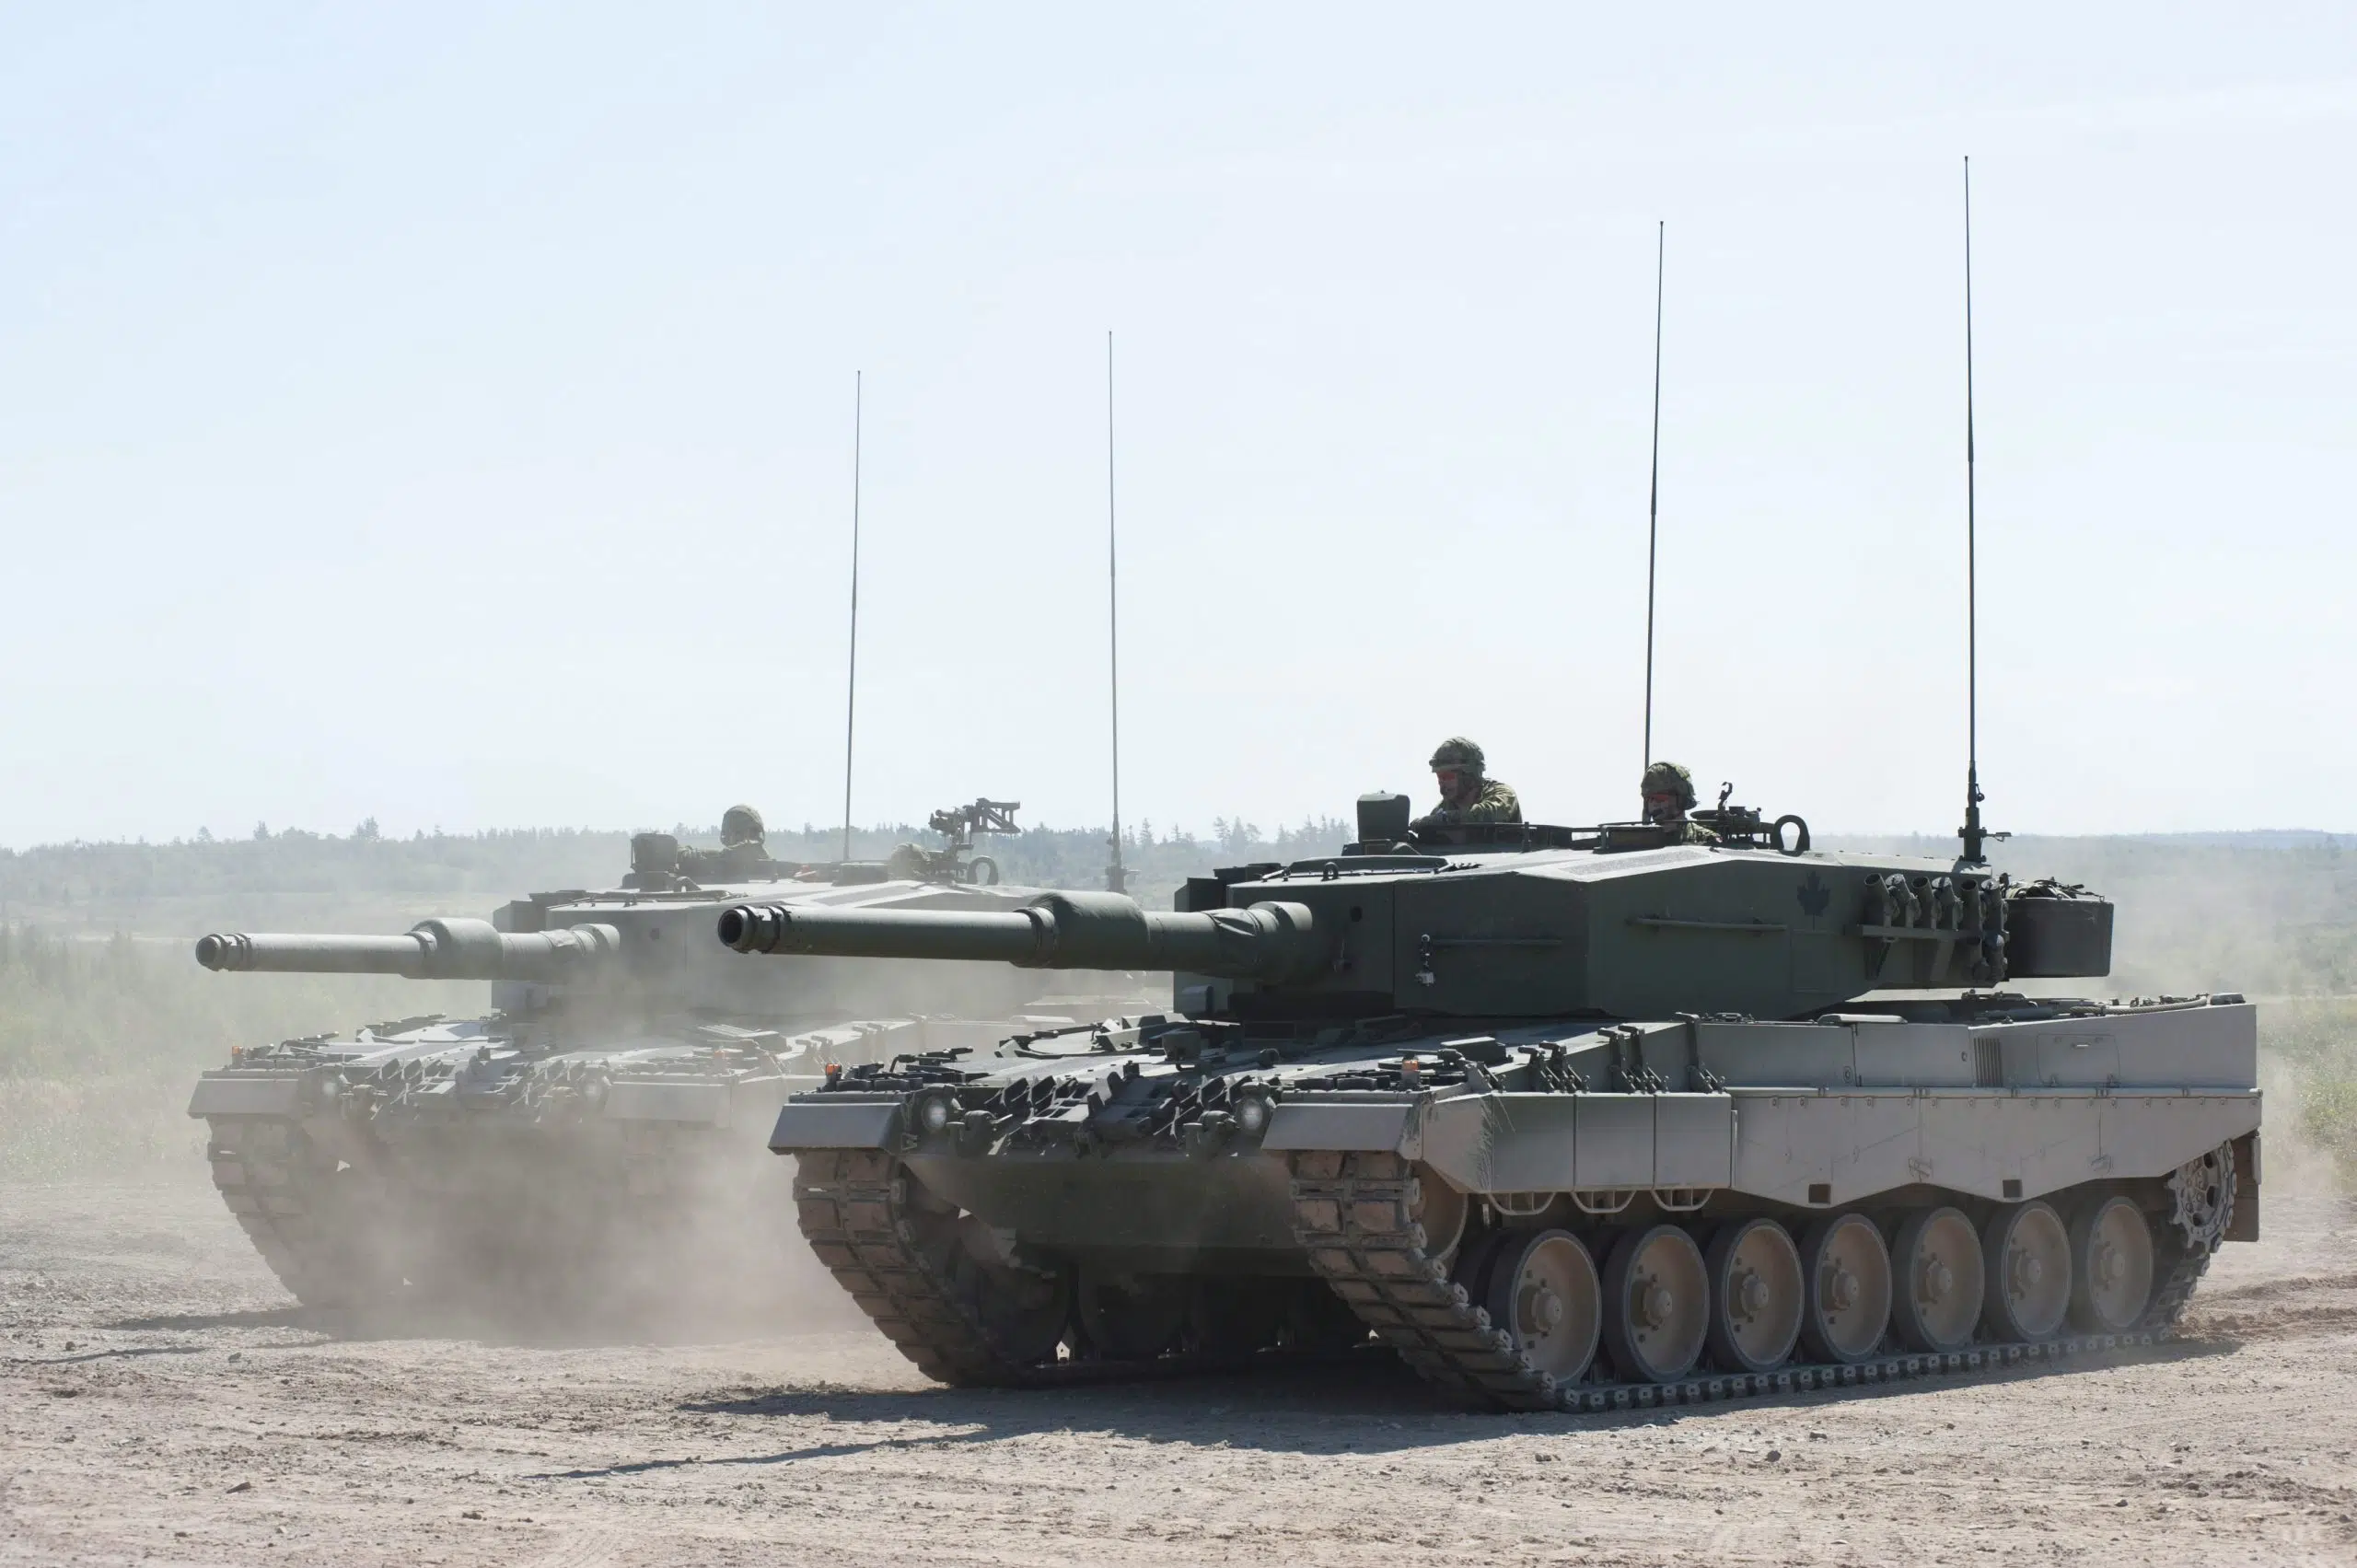 Modern tanks could help push back Russians, says former tank commander